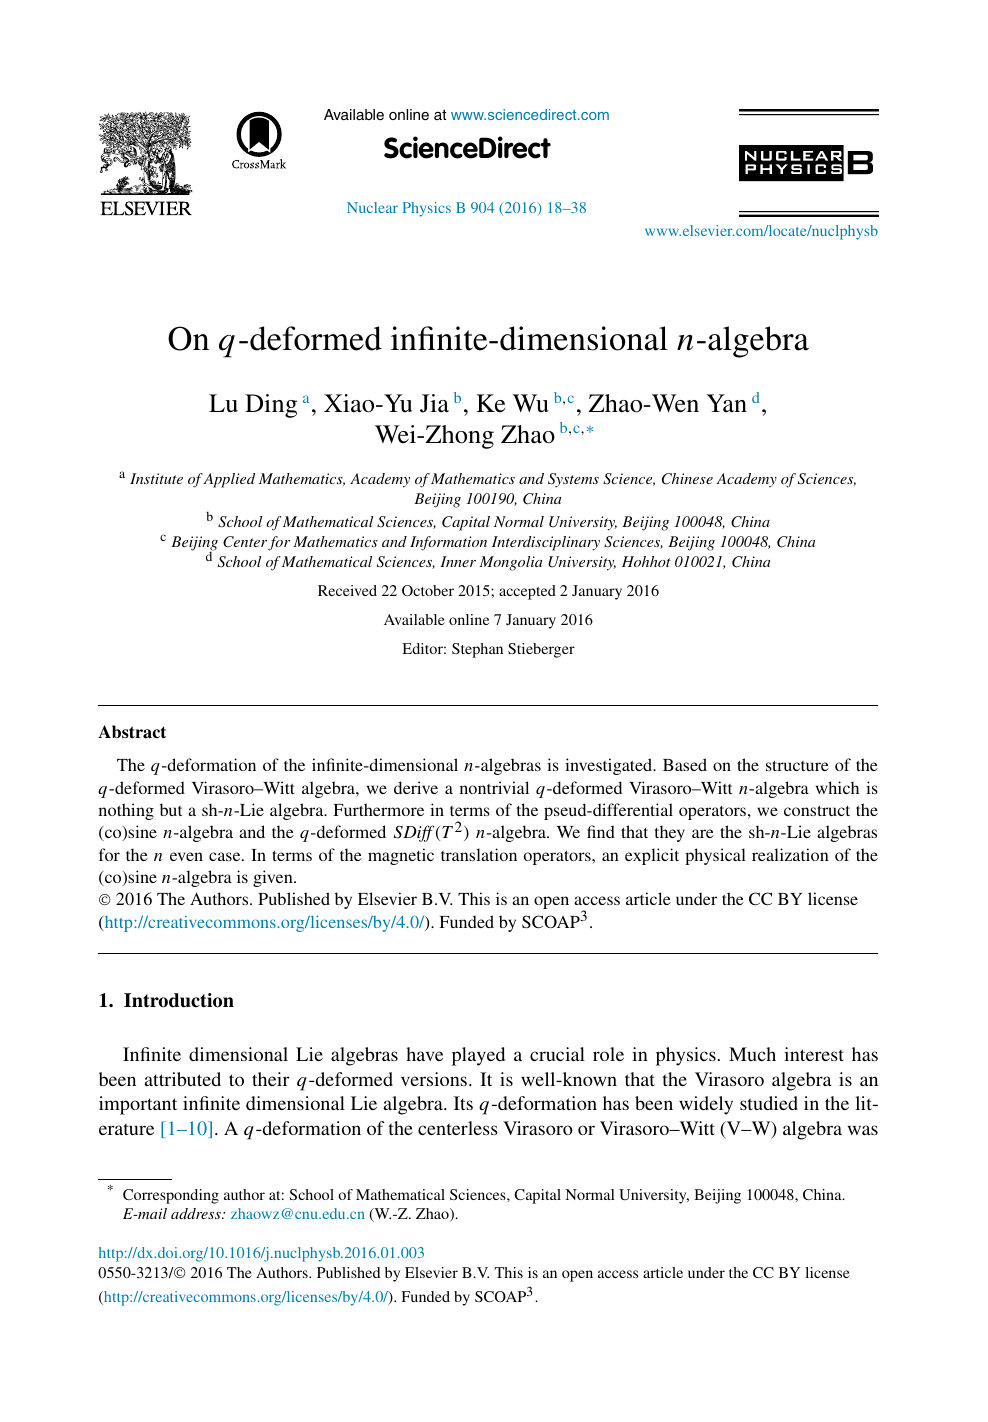 On Q Deformed Infinite Dimensional N Algebra Topic Of Research Paper In Physical Sciences Download Scholarly Article Pdf And Read For Free On Cyberleninka Open Science Hub